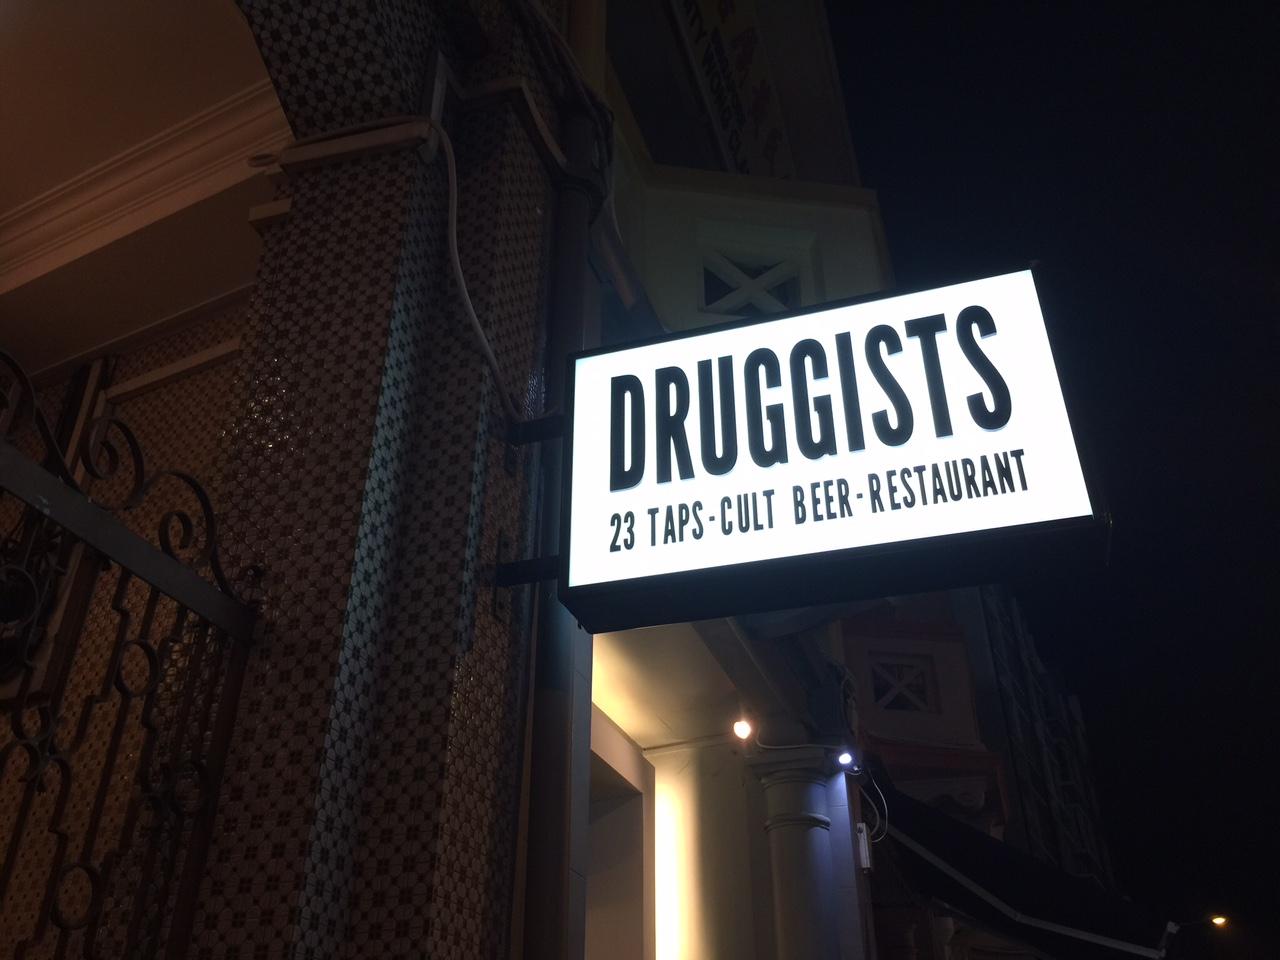 Cover image of this place Druggists